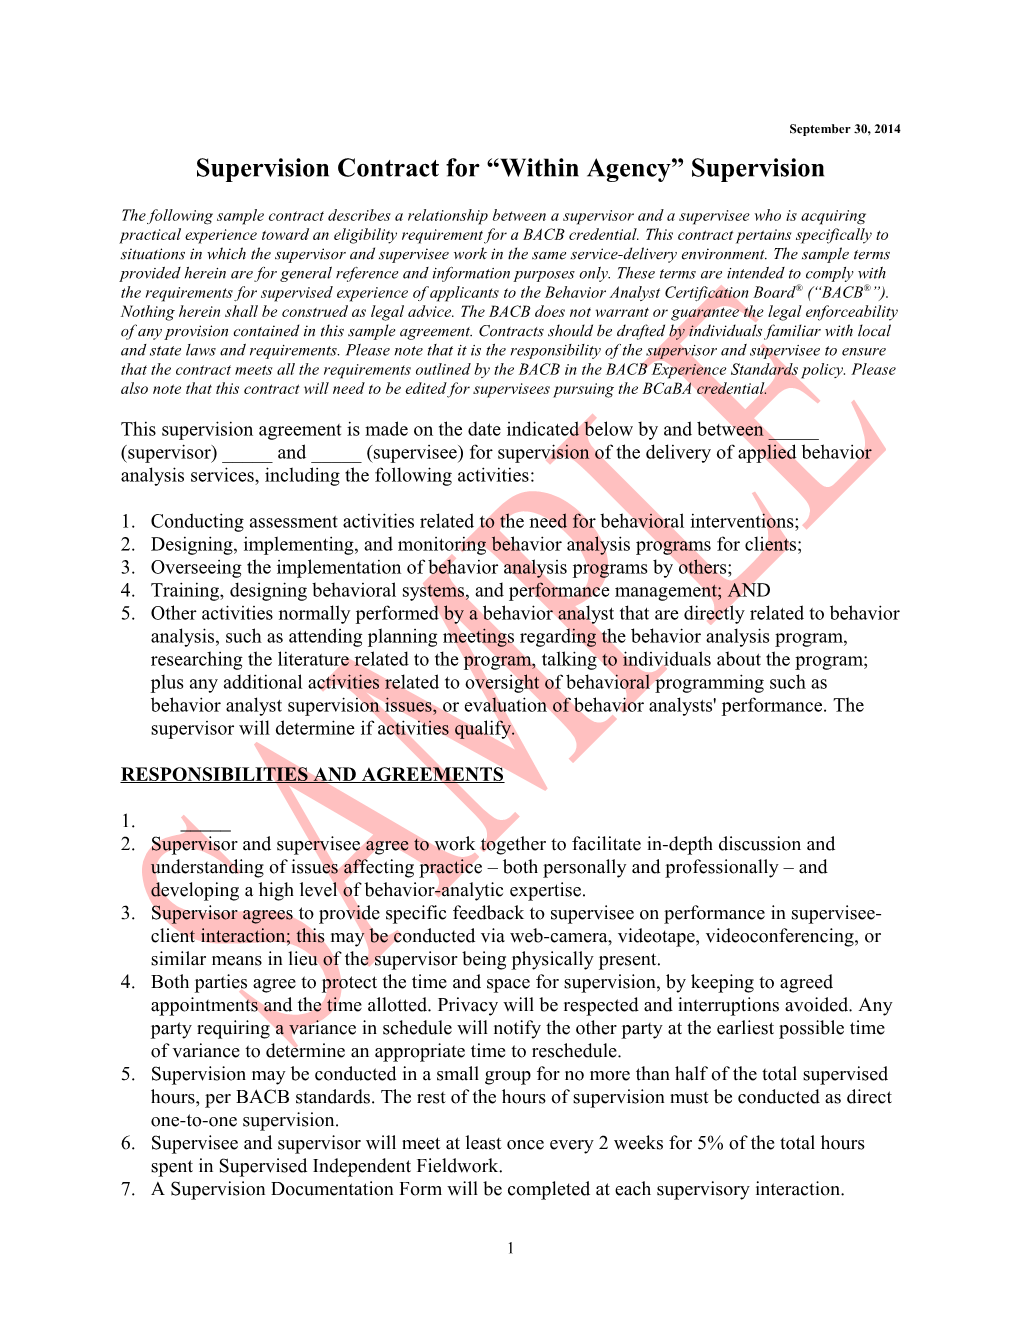 Supervision Contract for Within Agency Supervision